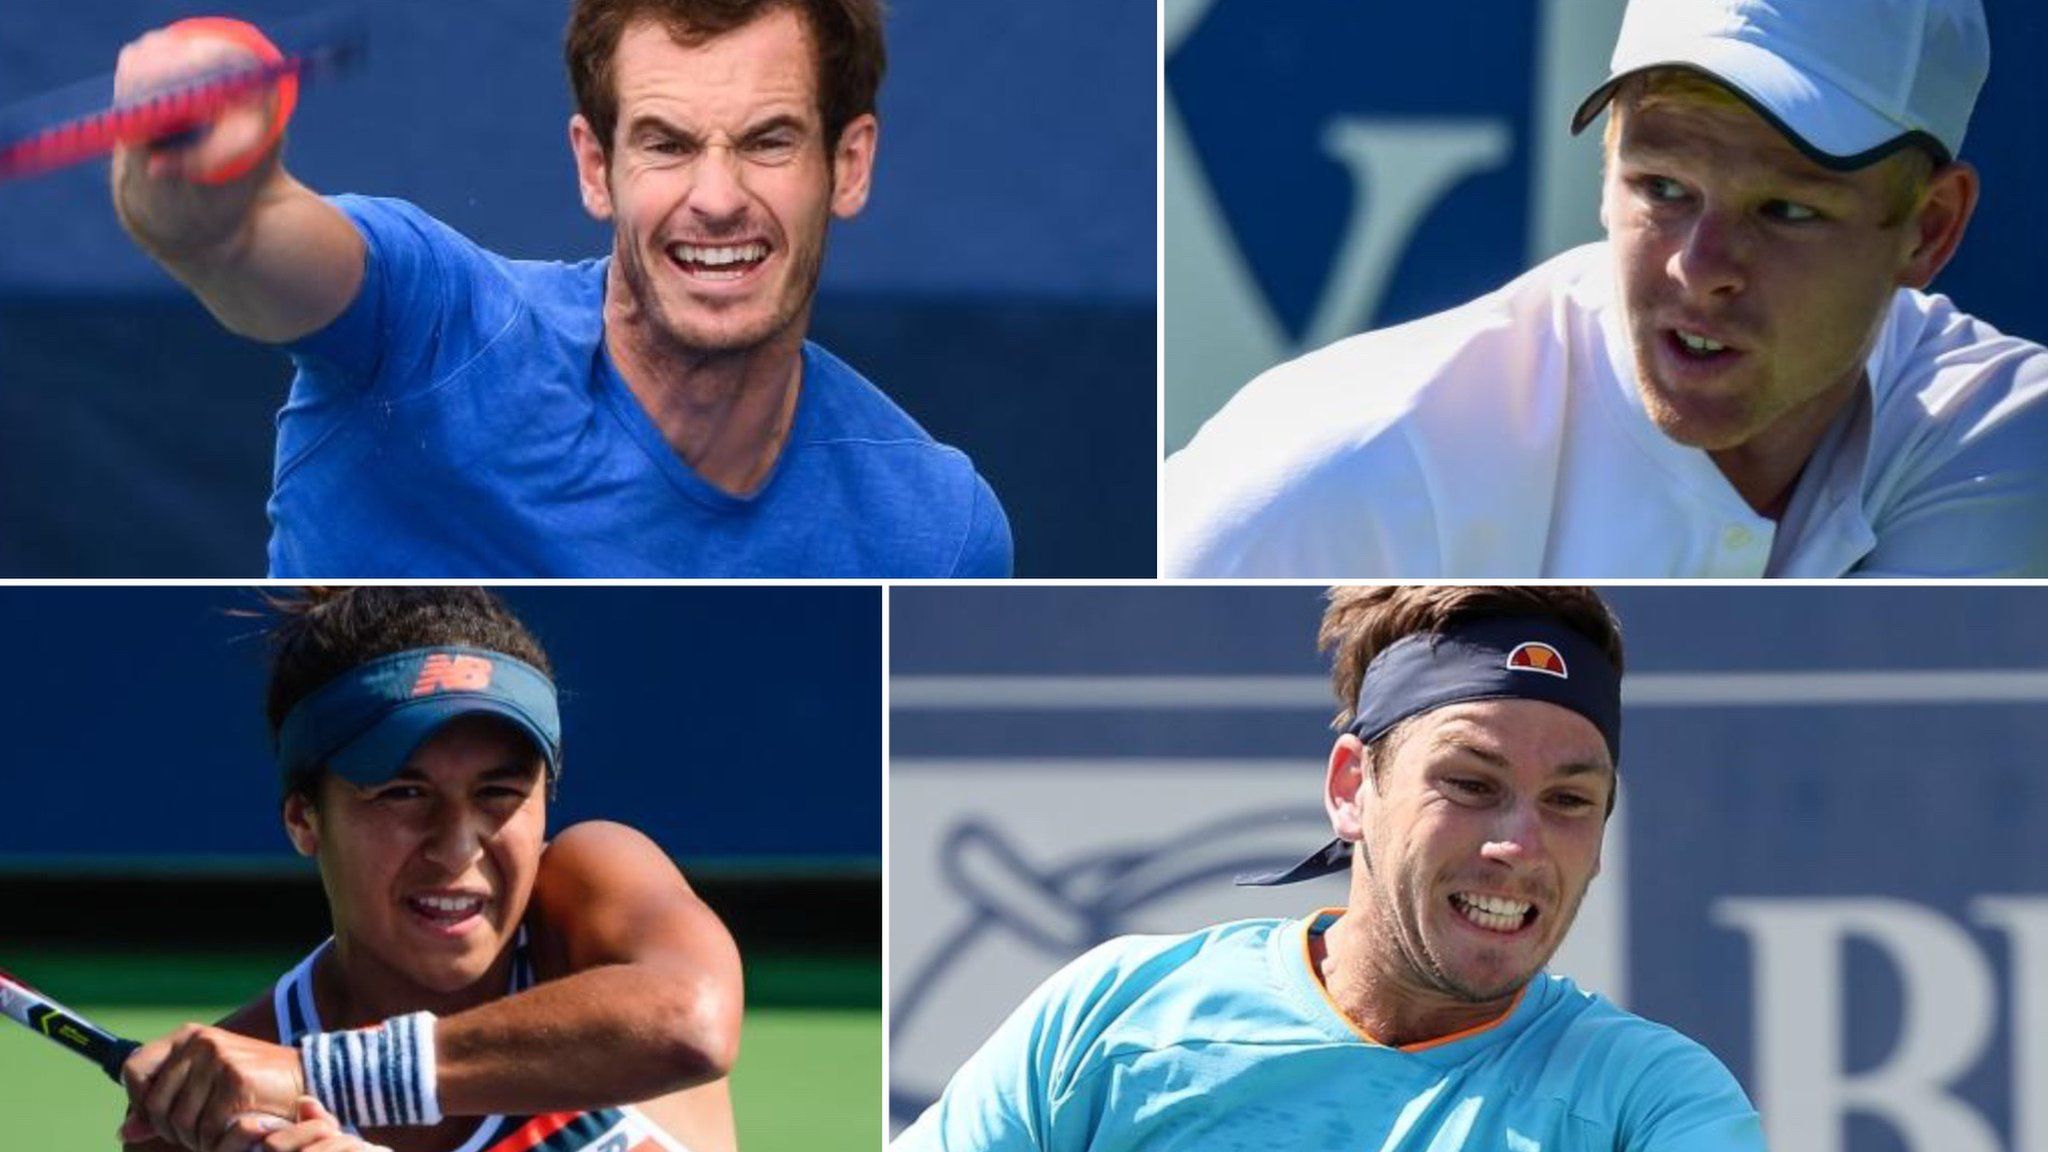 Andy Murray, Kyle Edmund, Heather Watson and Cameron Norrie